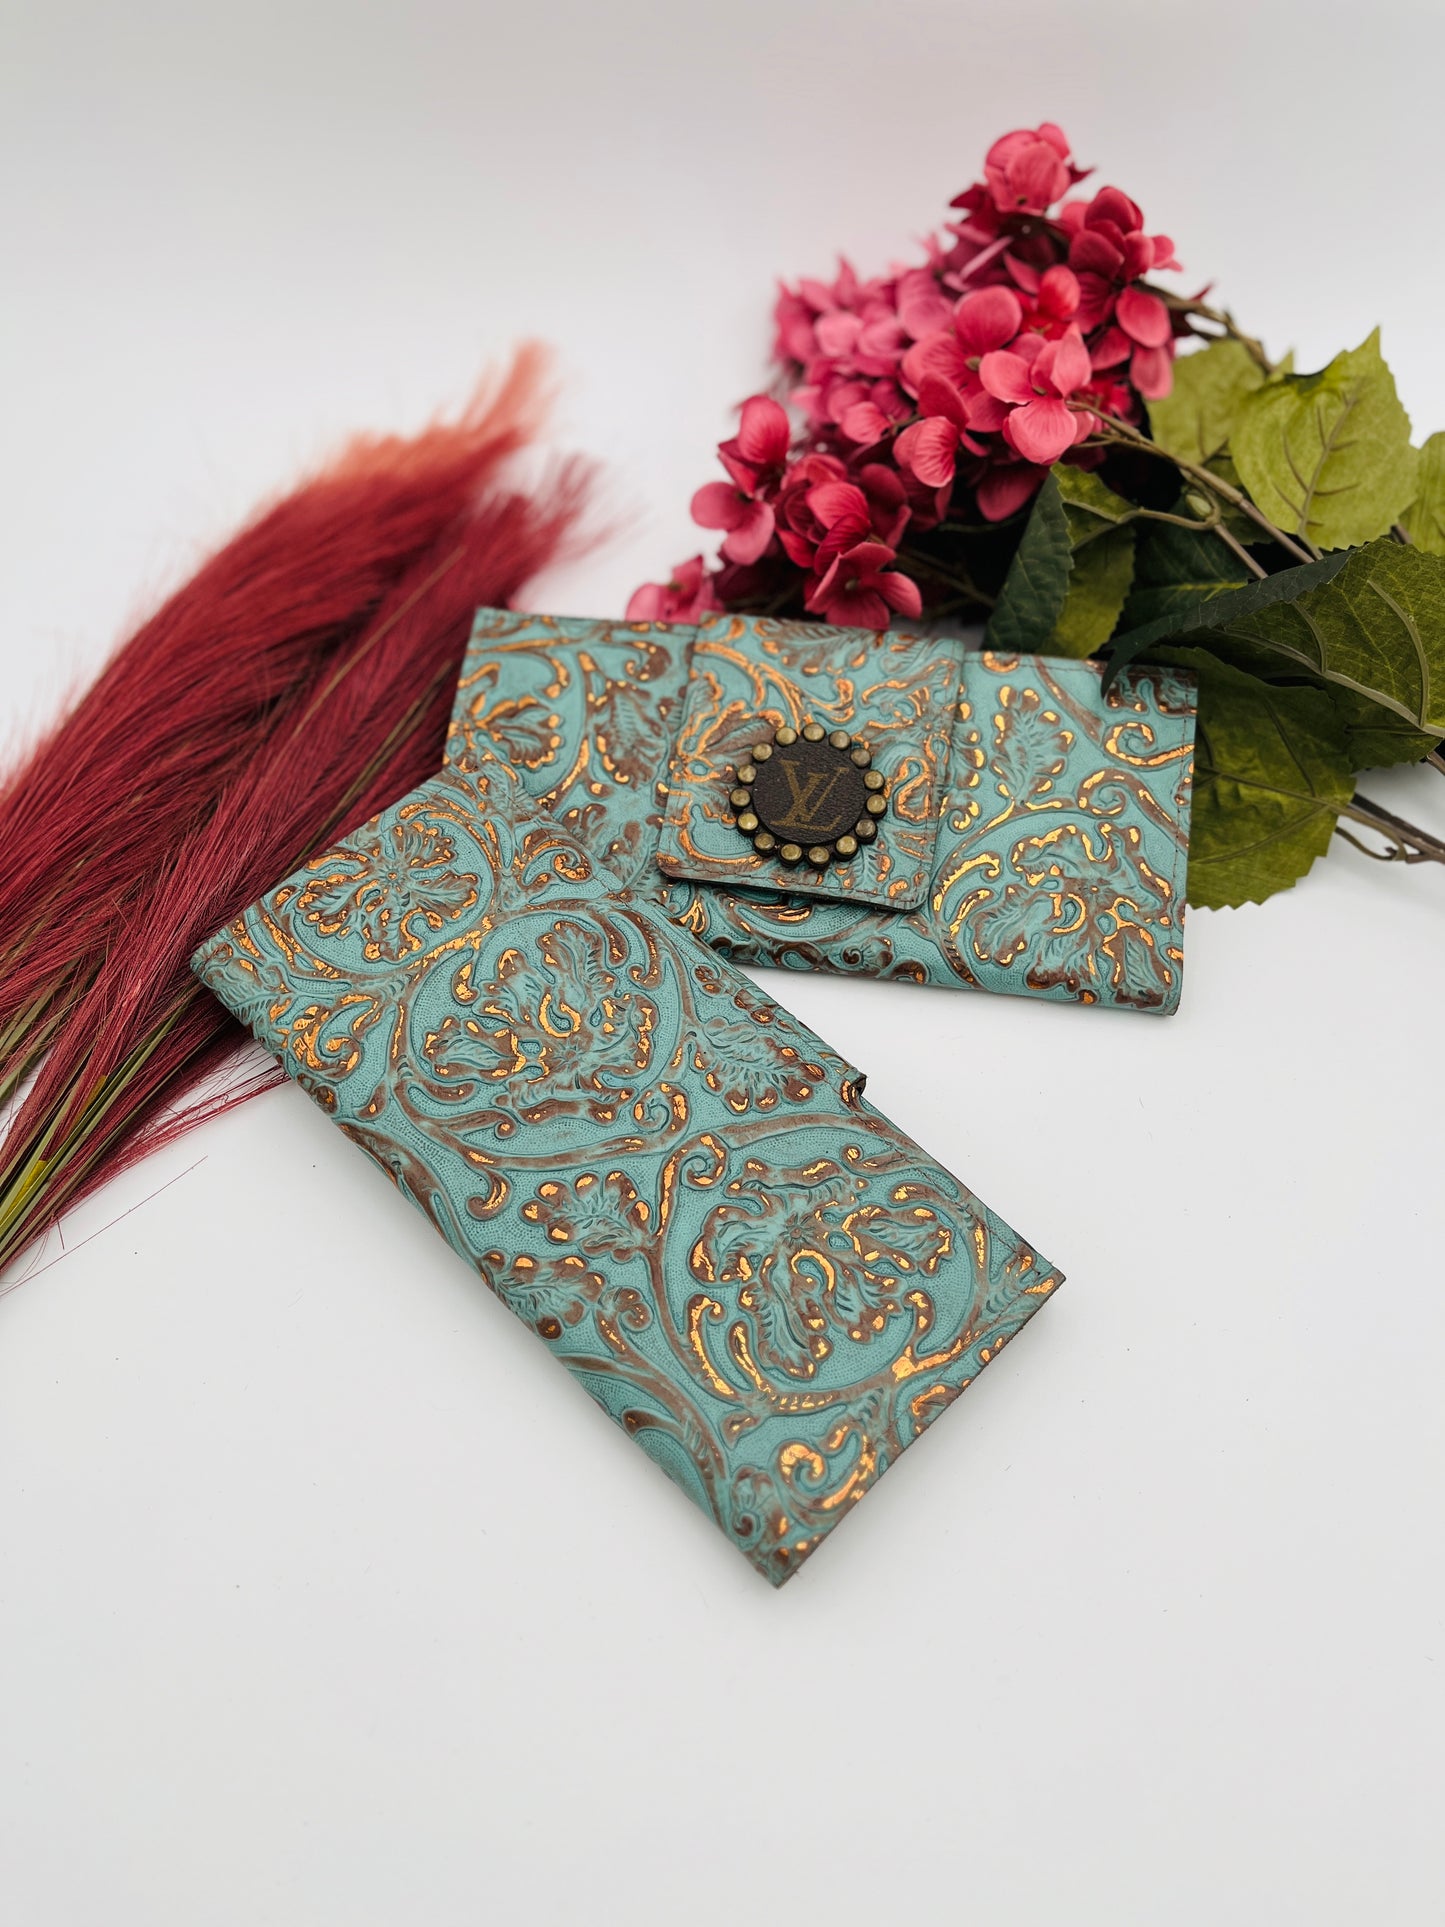 Large Turquoise Tooled Leather Wallet/Clutch